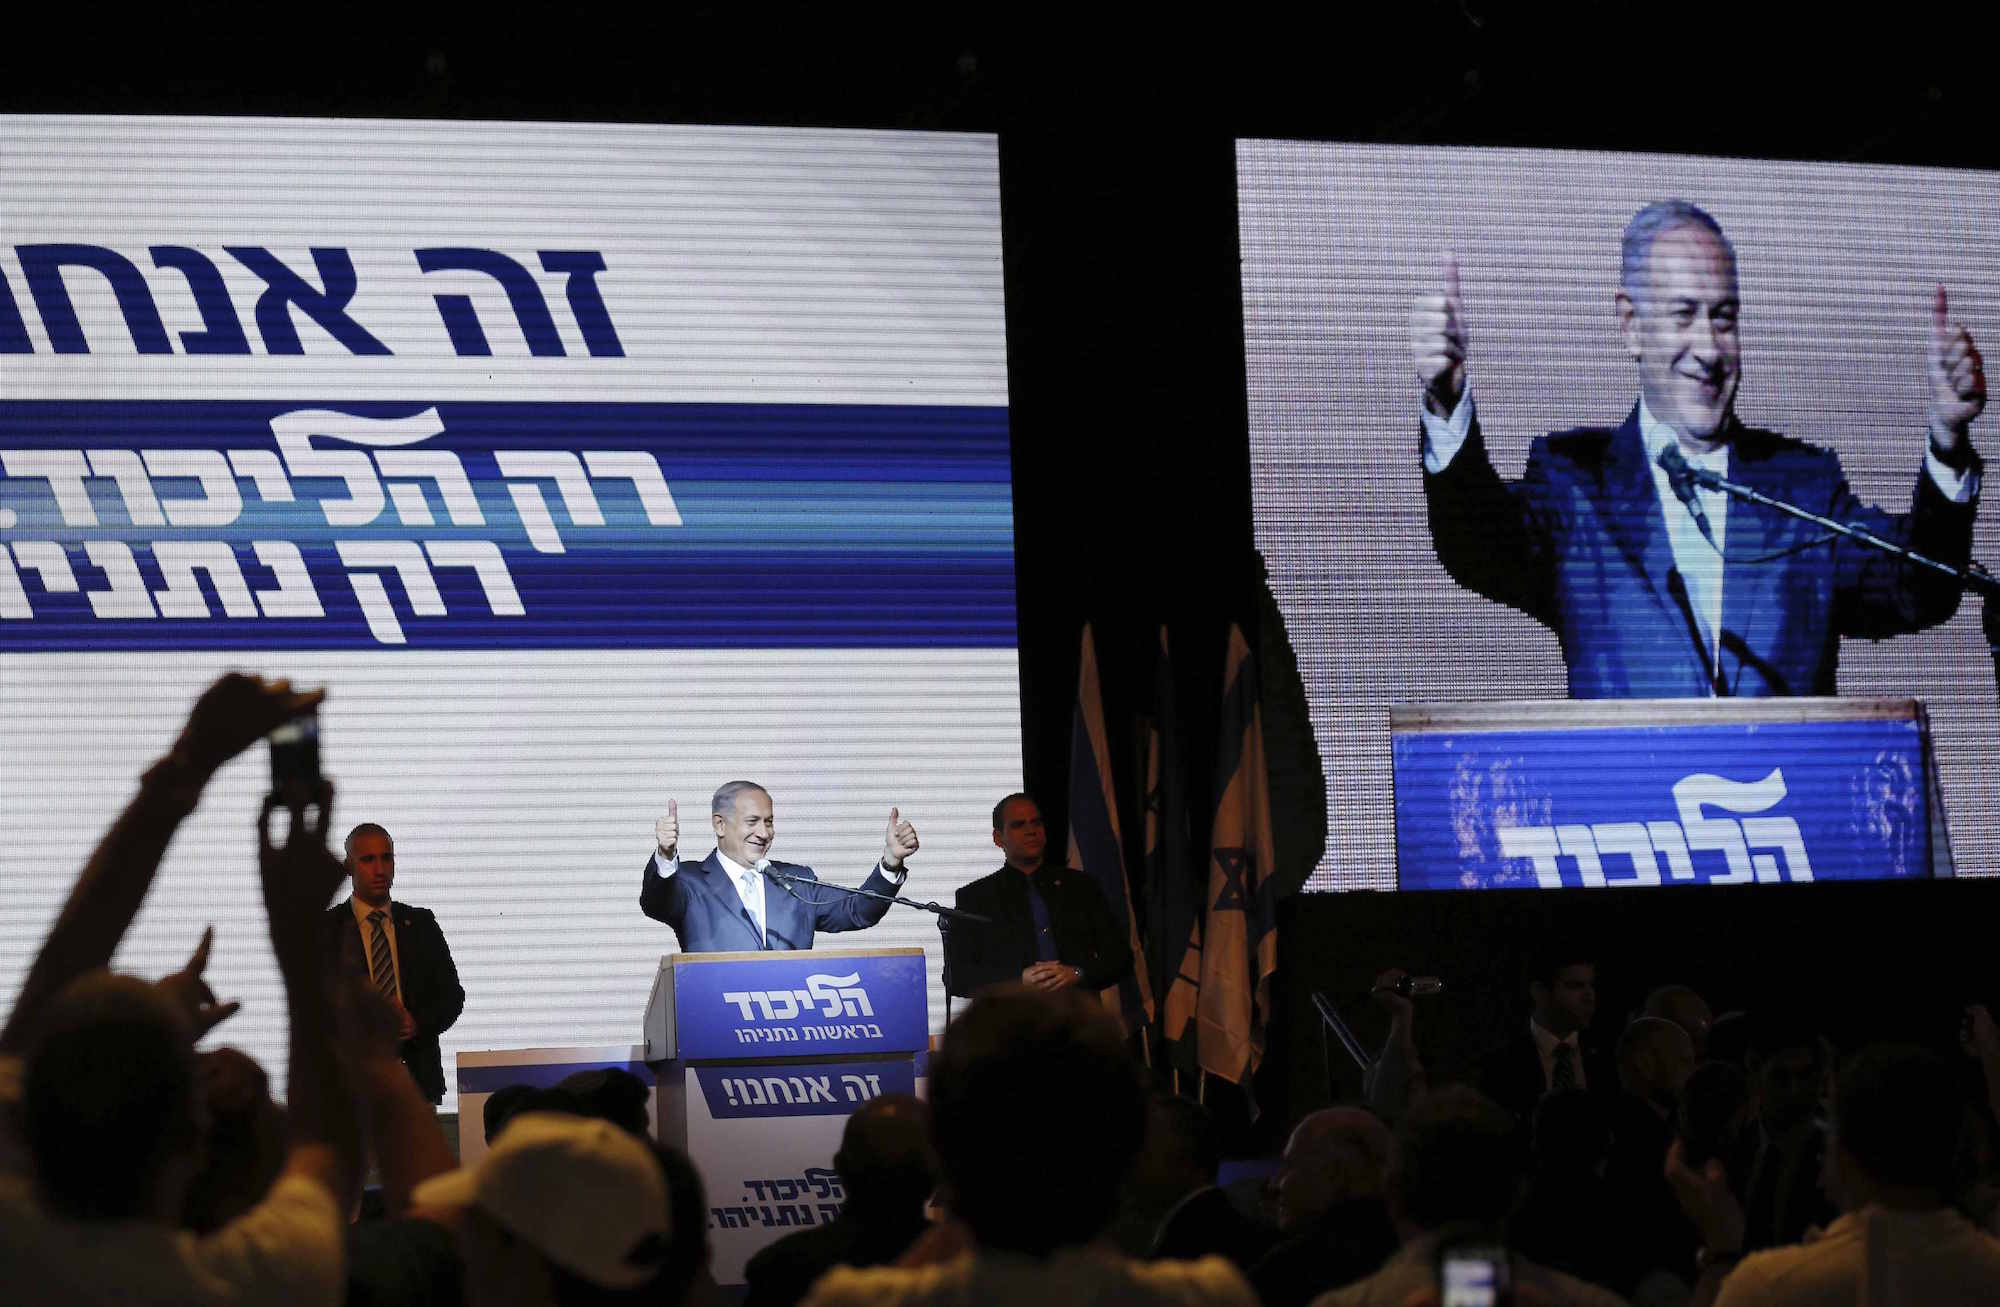 Israeli Prime Minister Benjamin Netanyahu gestures to supporters at party headquarters in Tel Aviv March 18, 2015. (Photo: REUTERS/Amir Cohen)